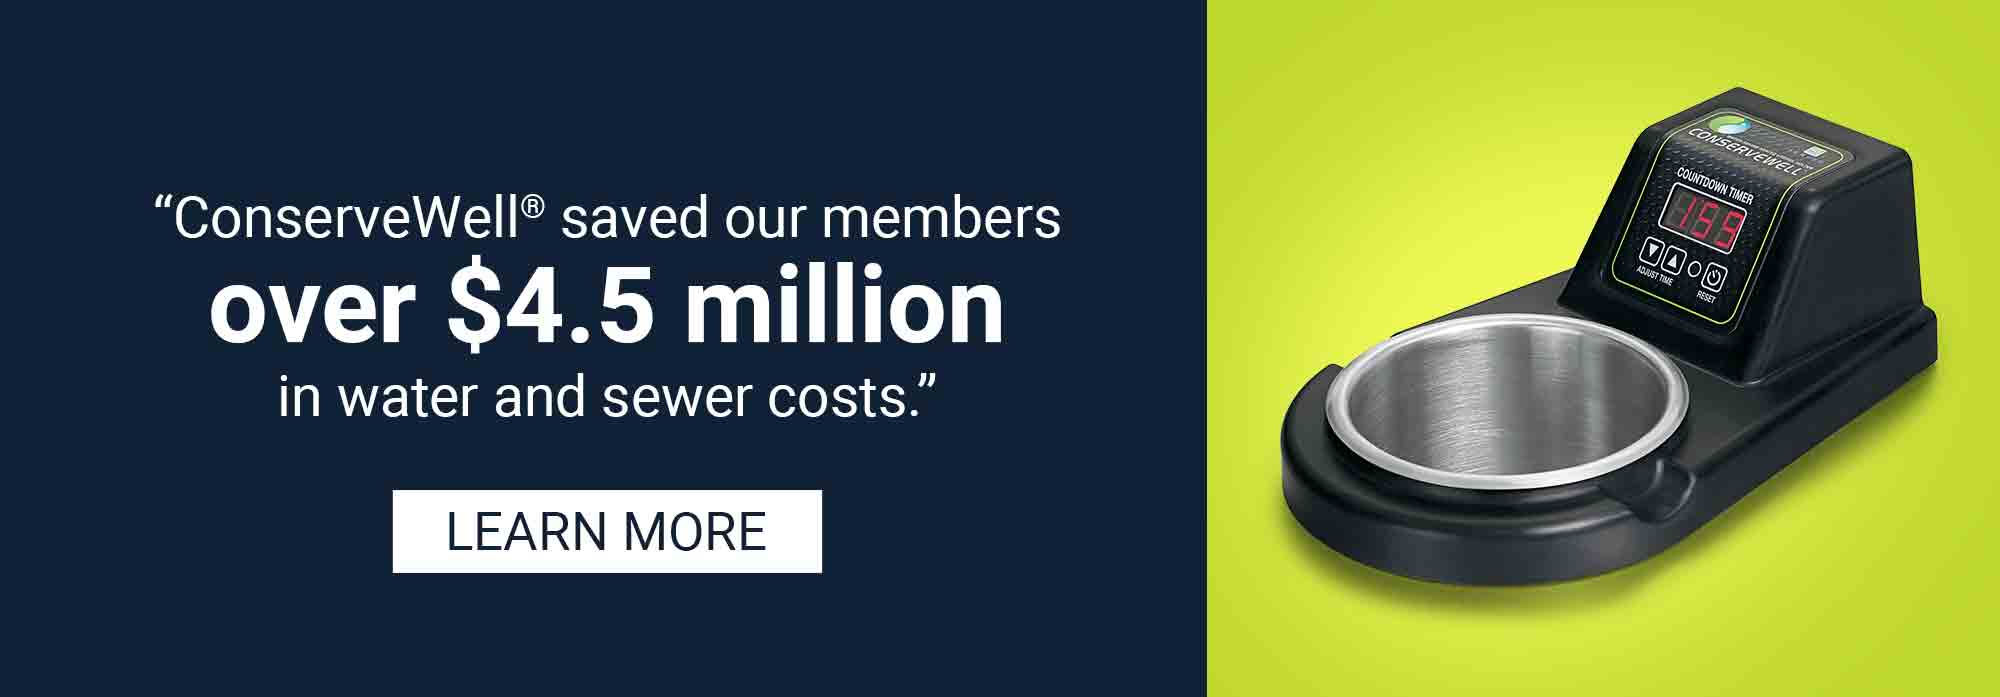 ConserveWell saved our members or ver $4.5 million in water and sewer costs. Learn more.